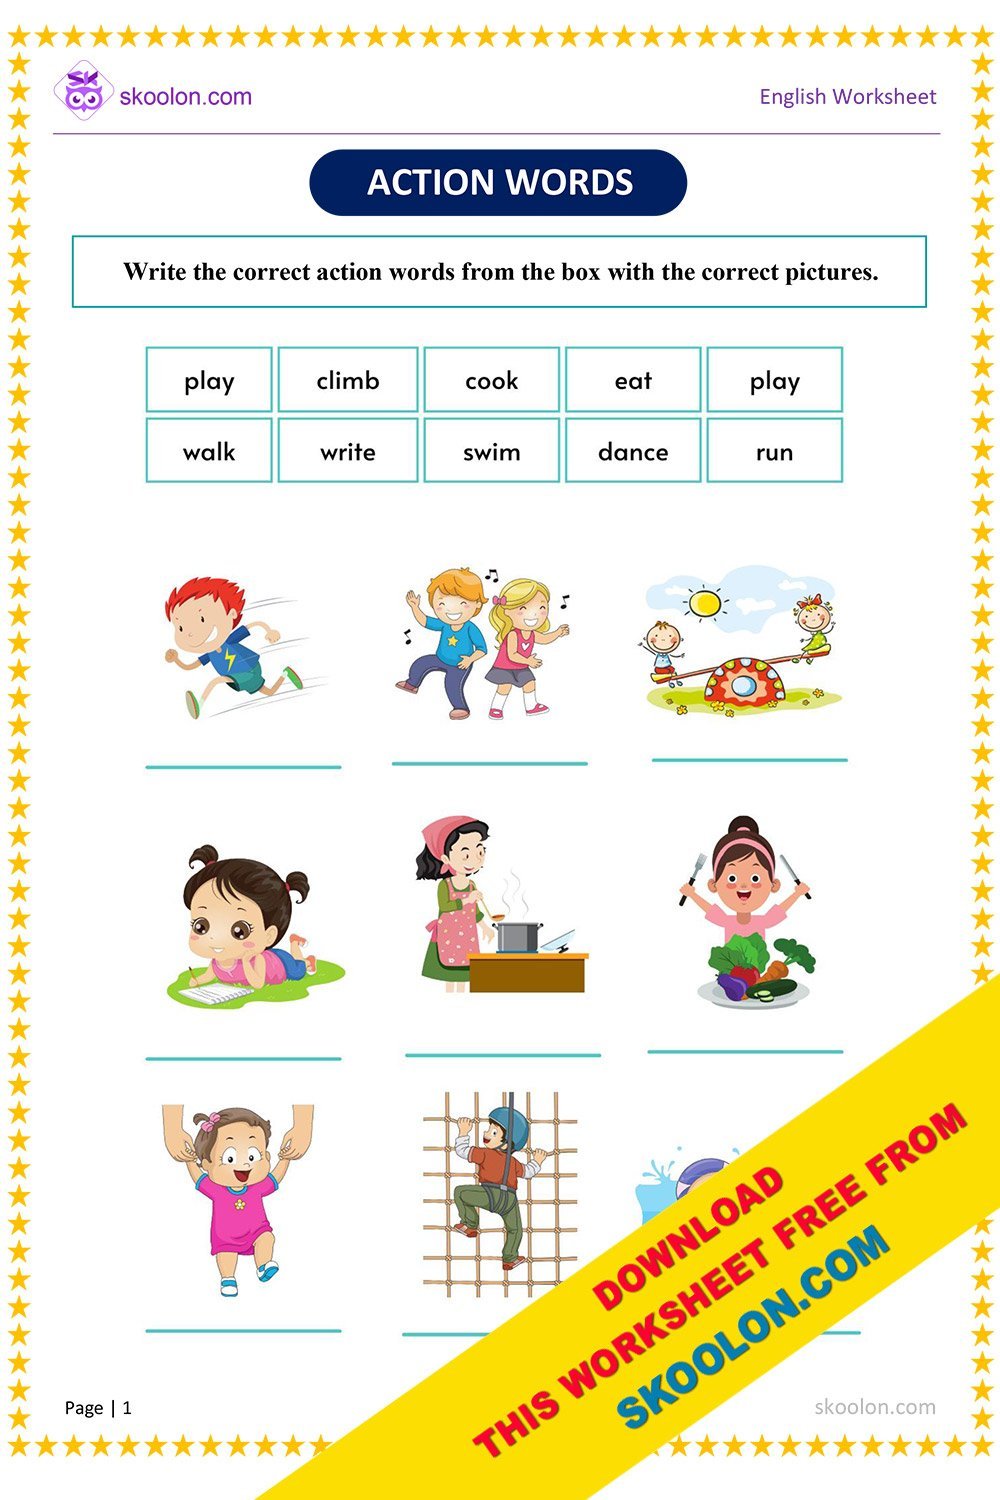 Action Words Worksheet For Class 5